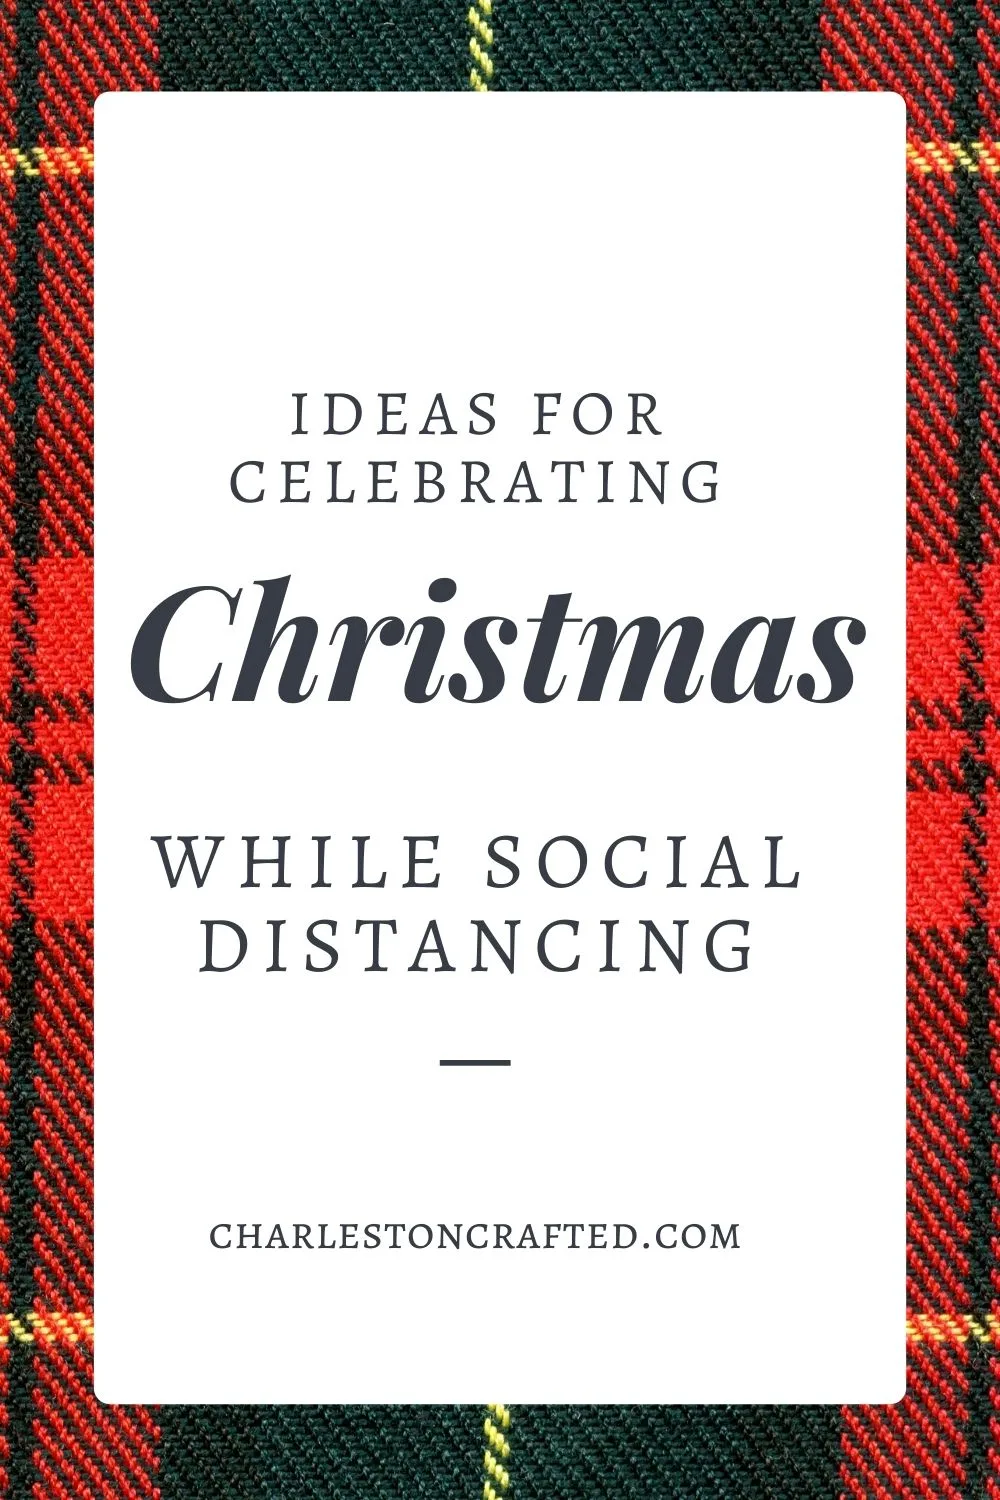 Ideas for celebrating Christmas while social distancing